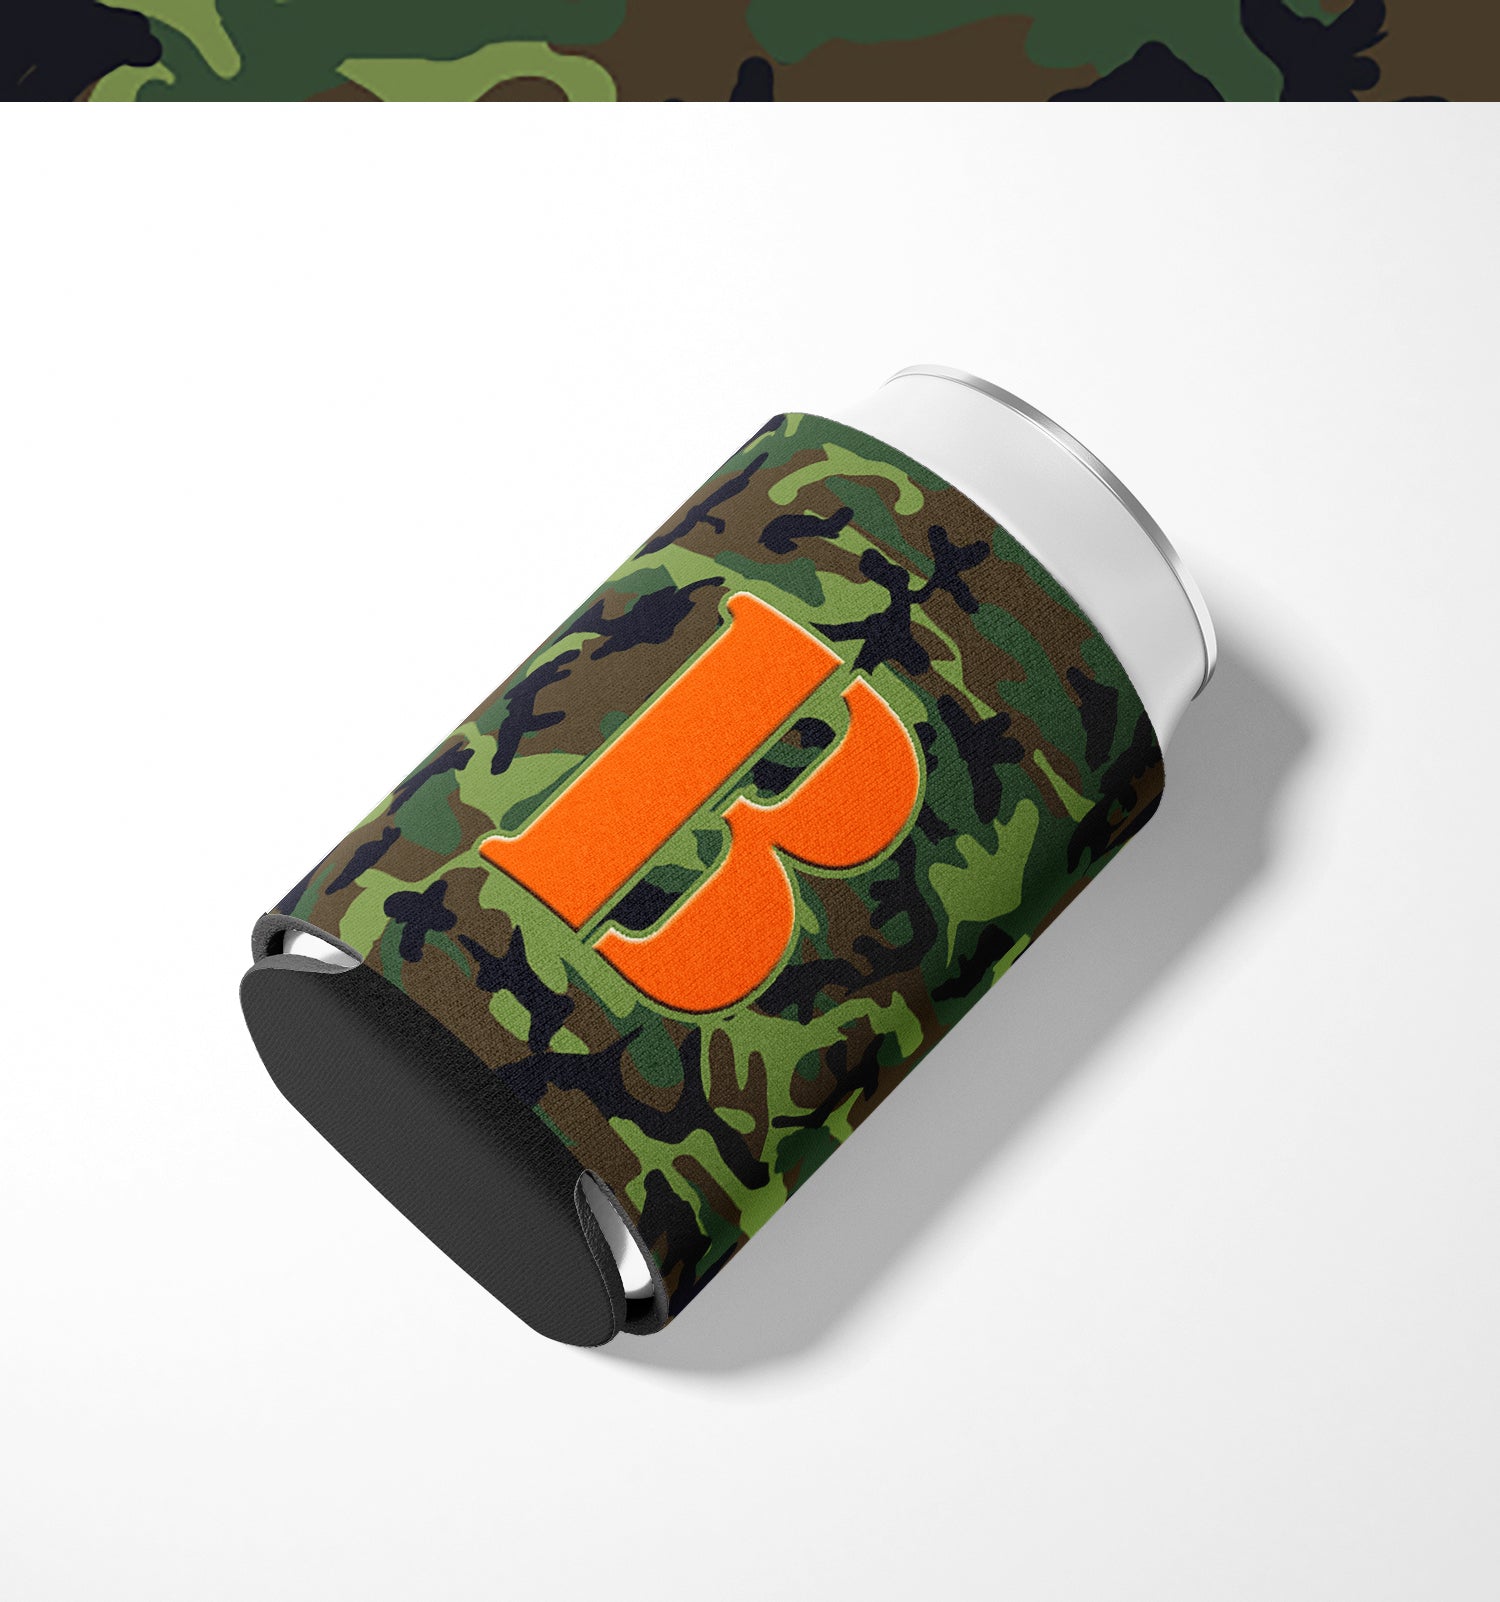 Lettre B Monogramme initial - Camo Green Can ou Bottle Beverage Insulator Hugger